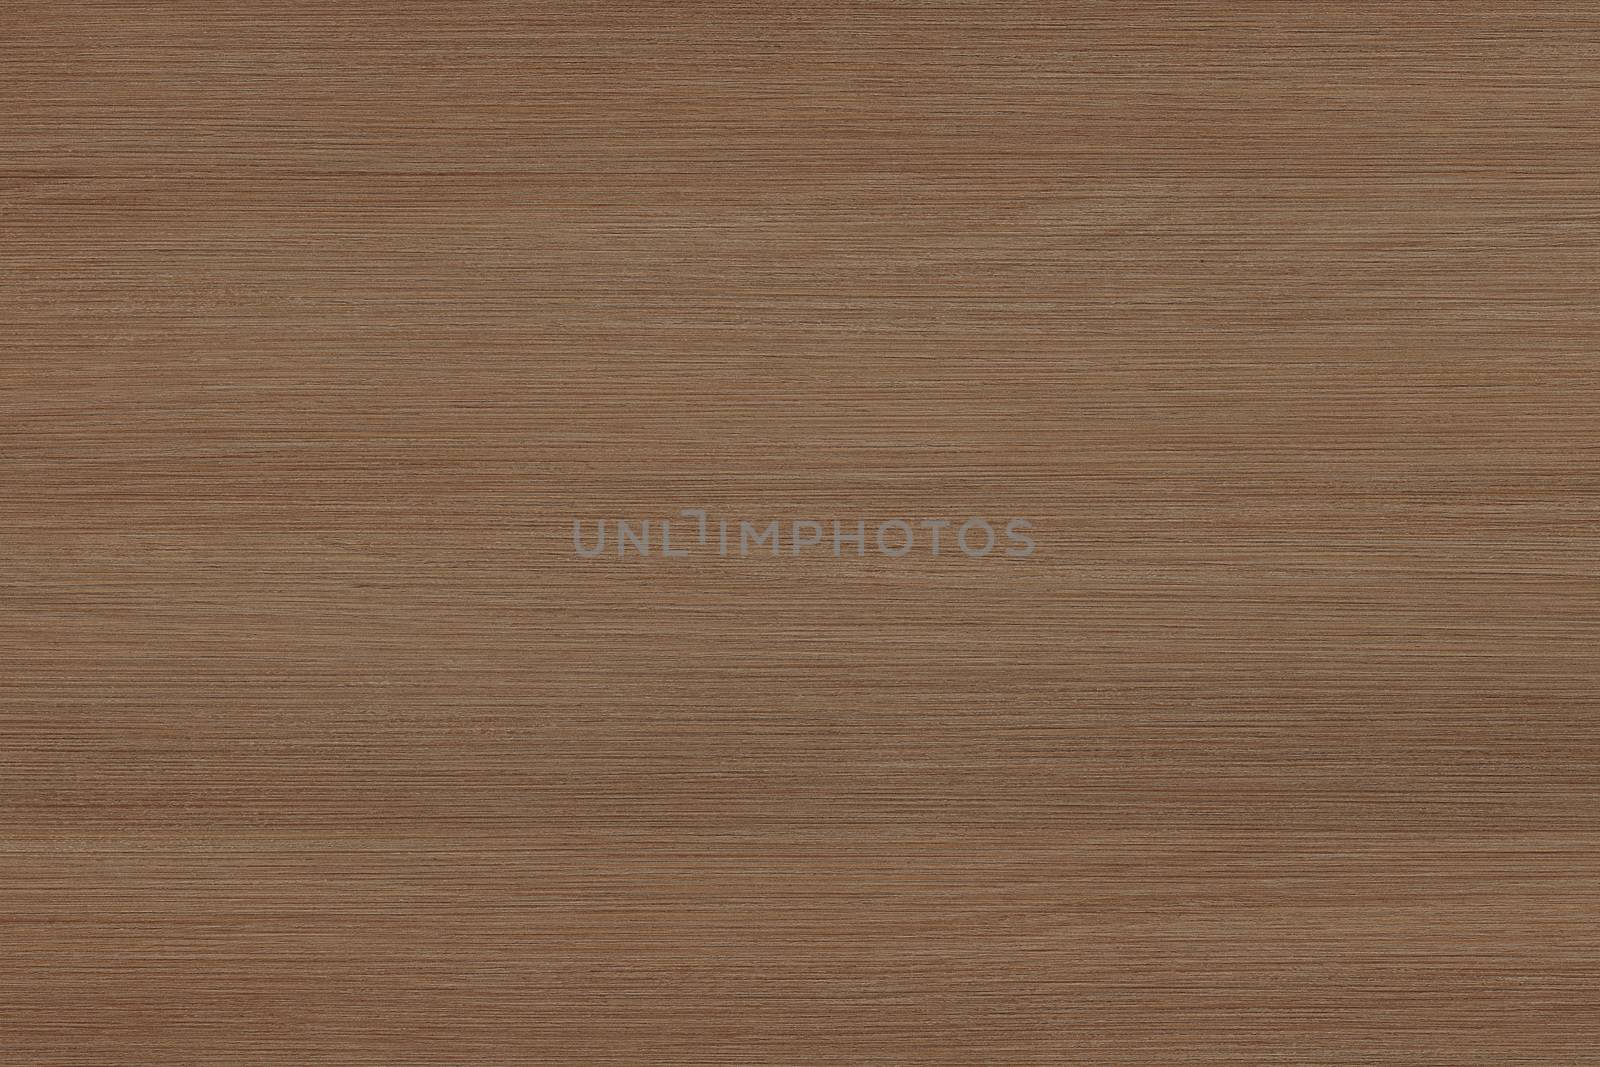 Brown wood texture. Abstract background. Dark brown scratched wooden cutting board.